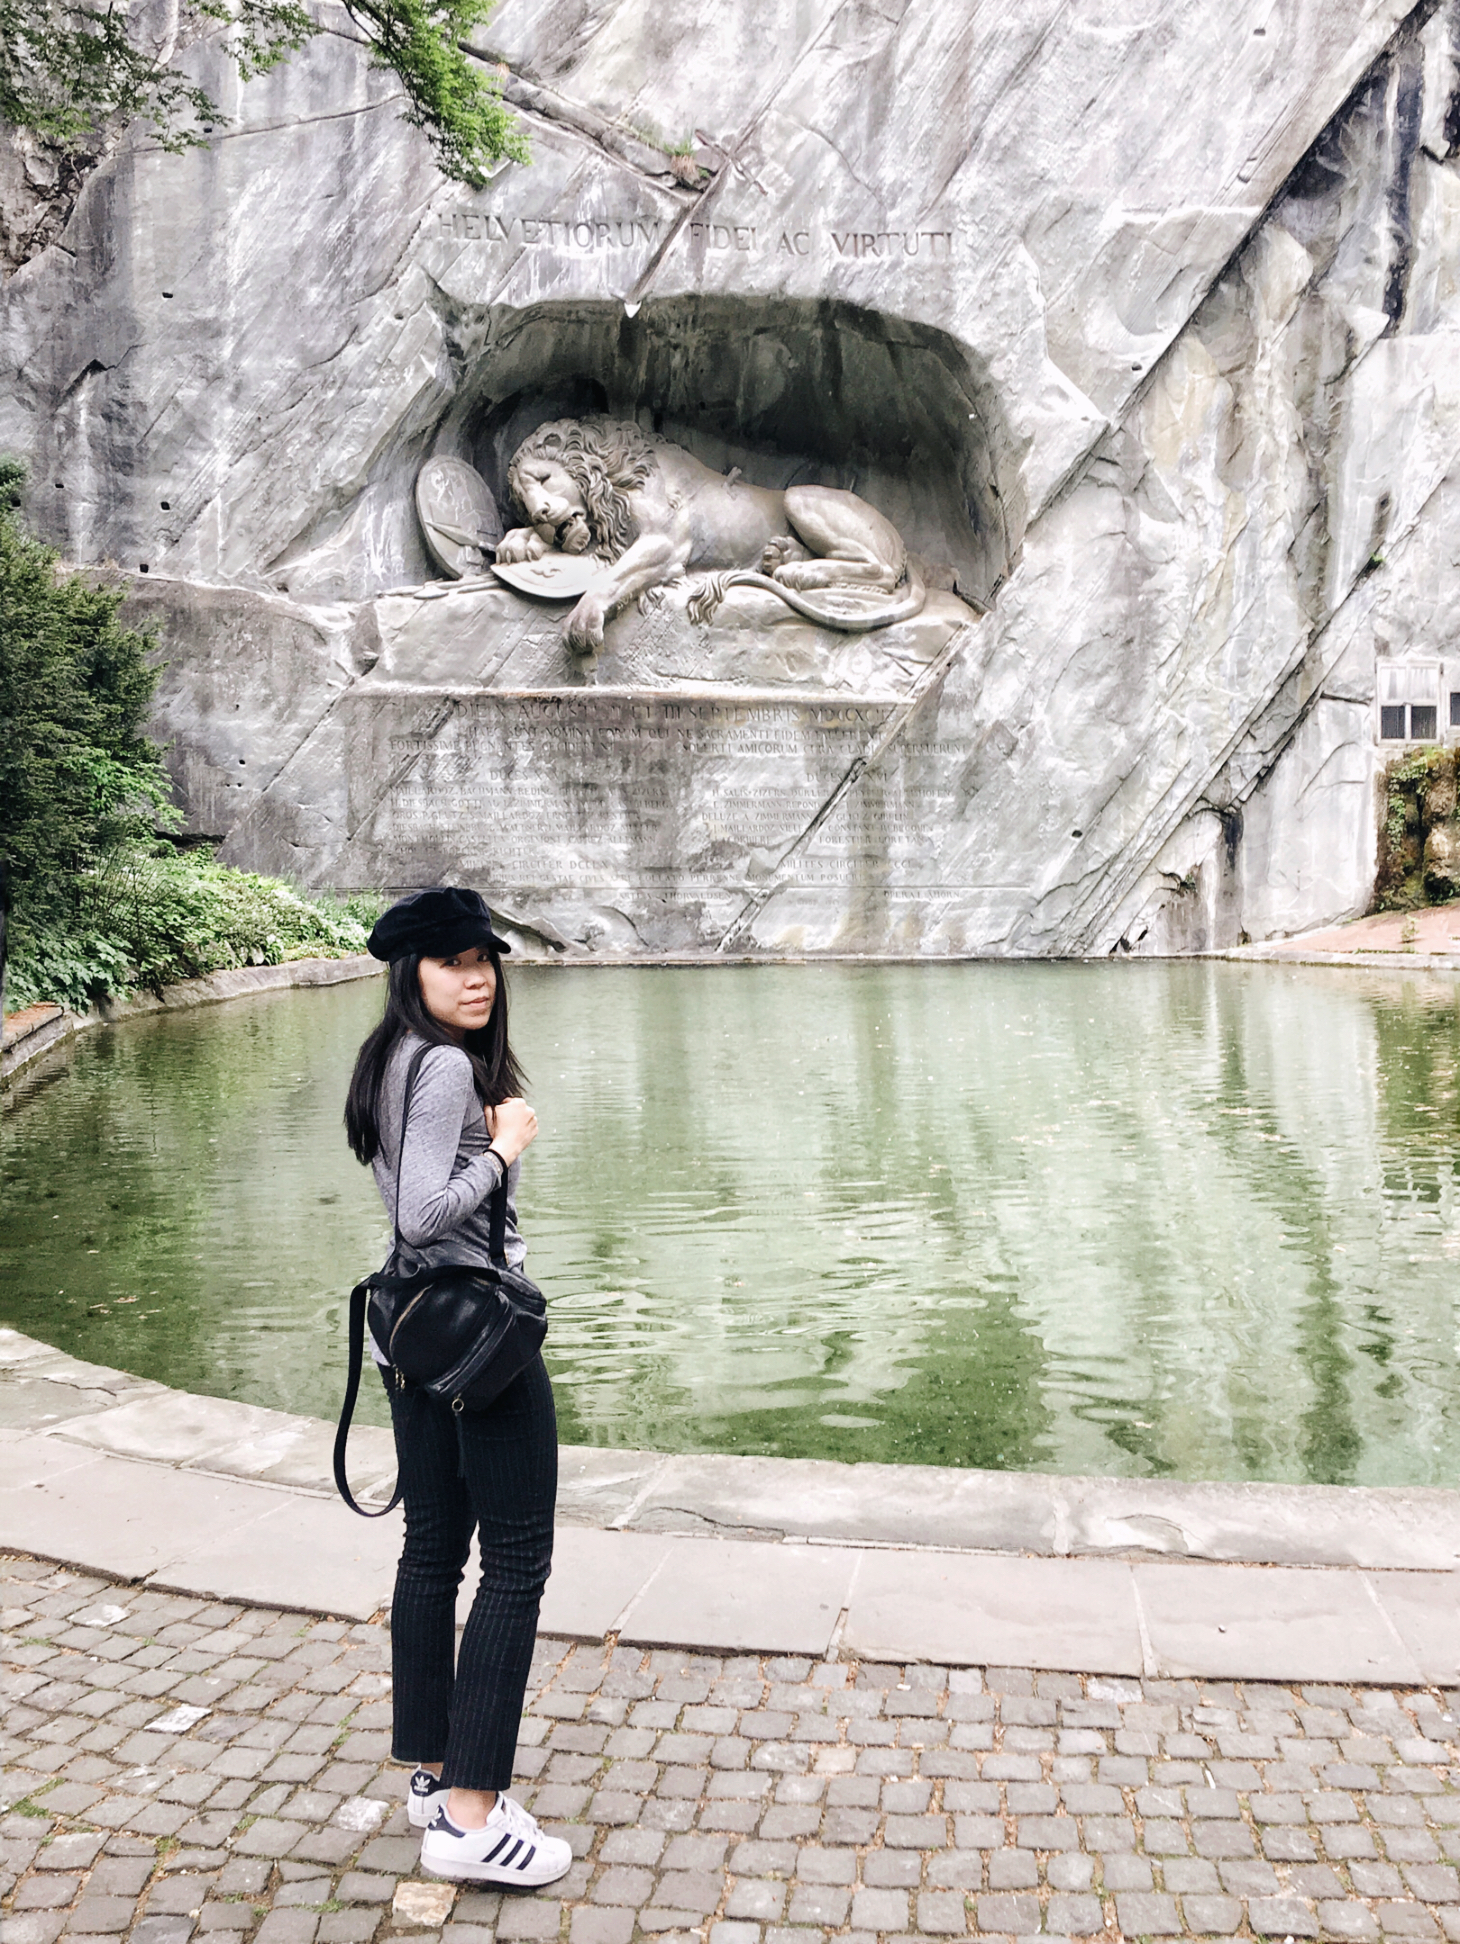 Dying Lion monument in Lucerne